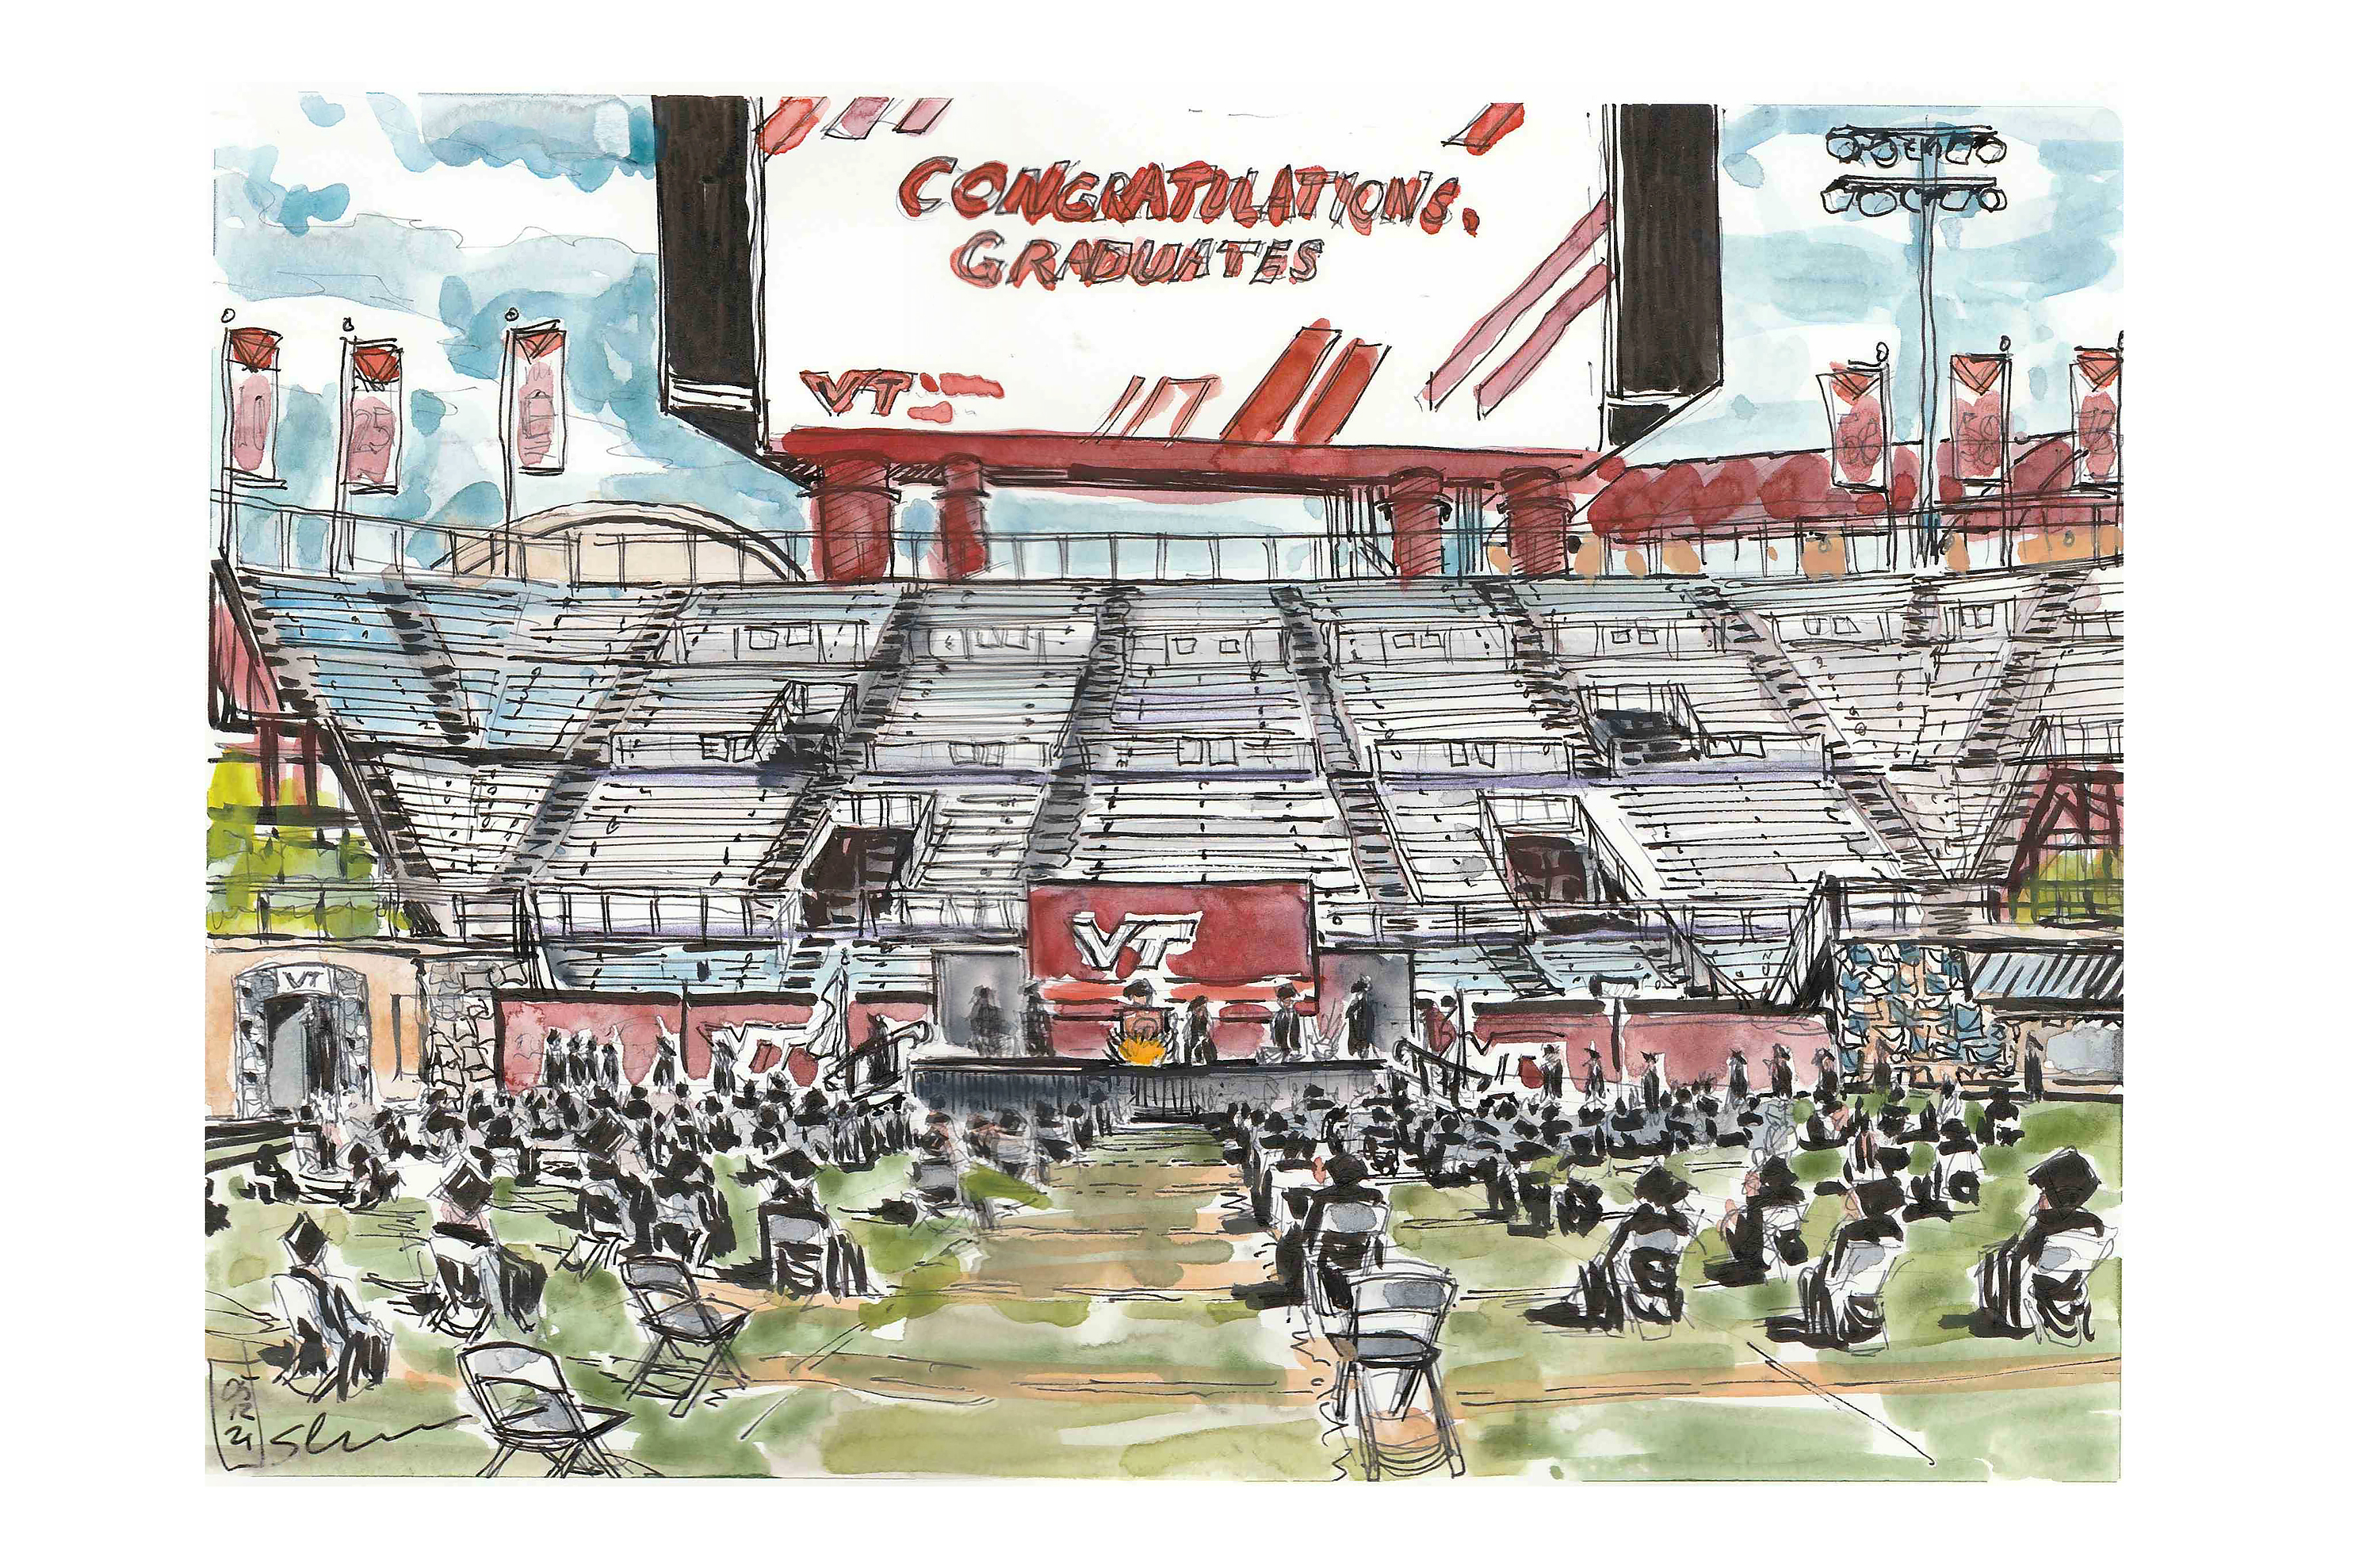 Congratulations, Graduates (00183) -- Appeared on May 18, 2021